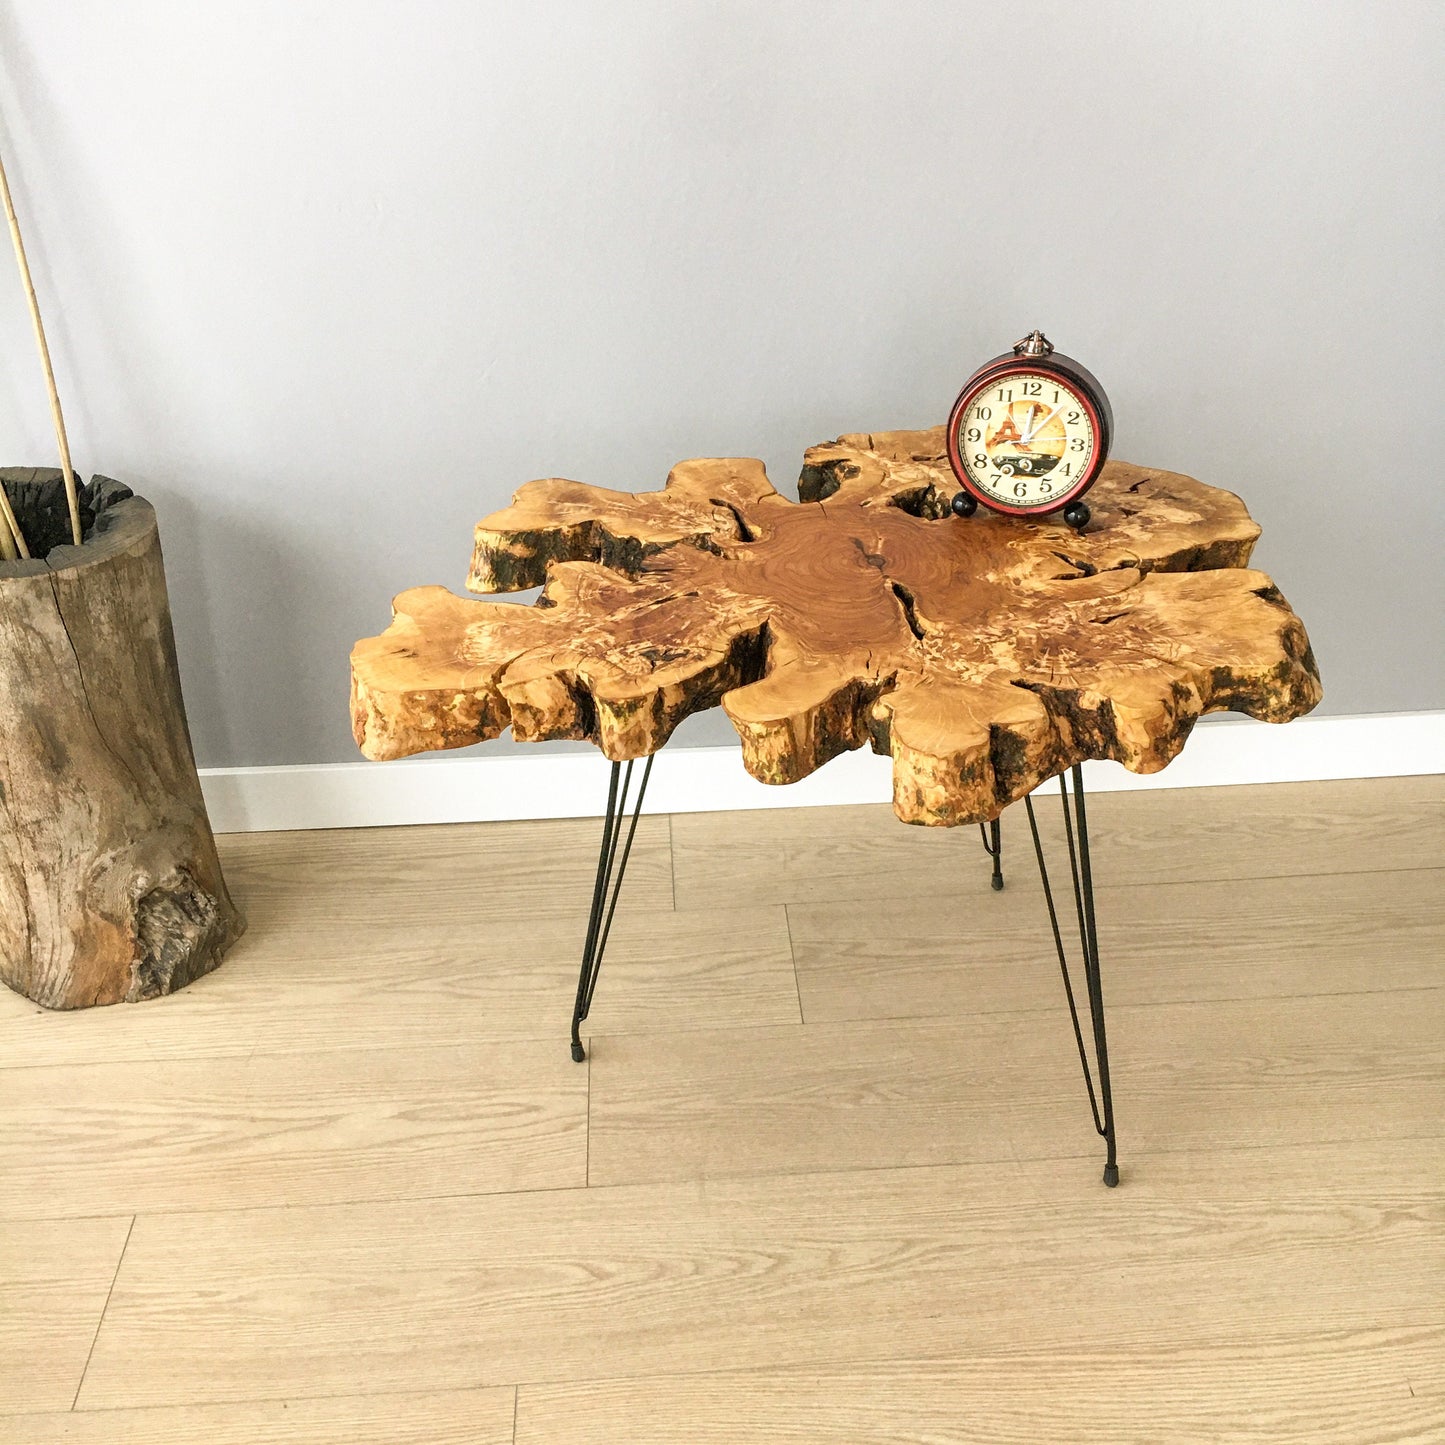 Made to Order, Olive Wood Live Edge Coffee table, Unique coffee